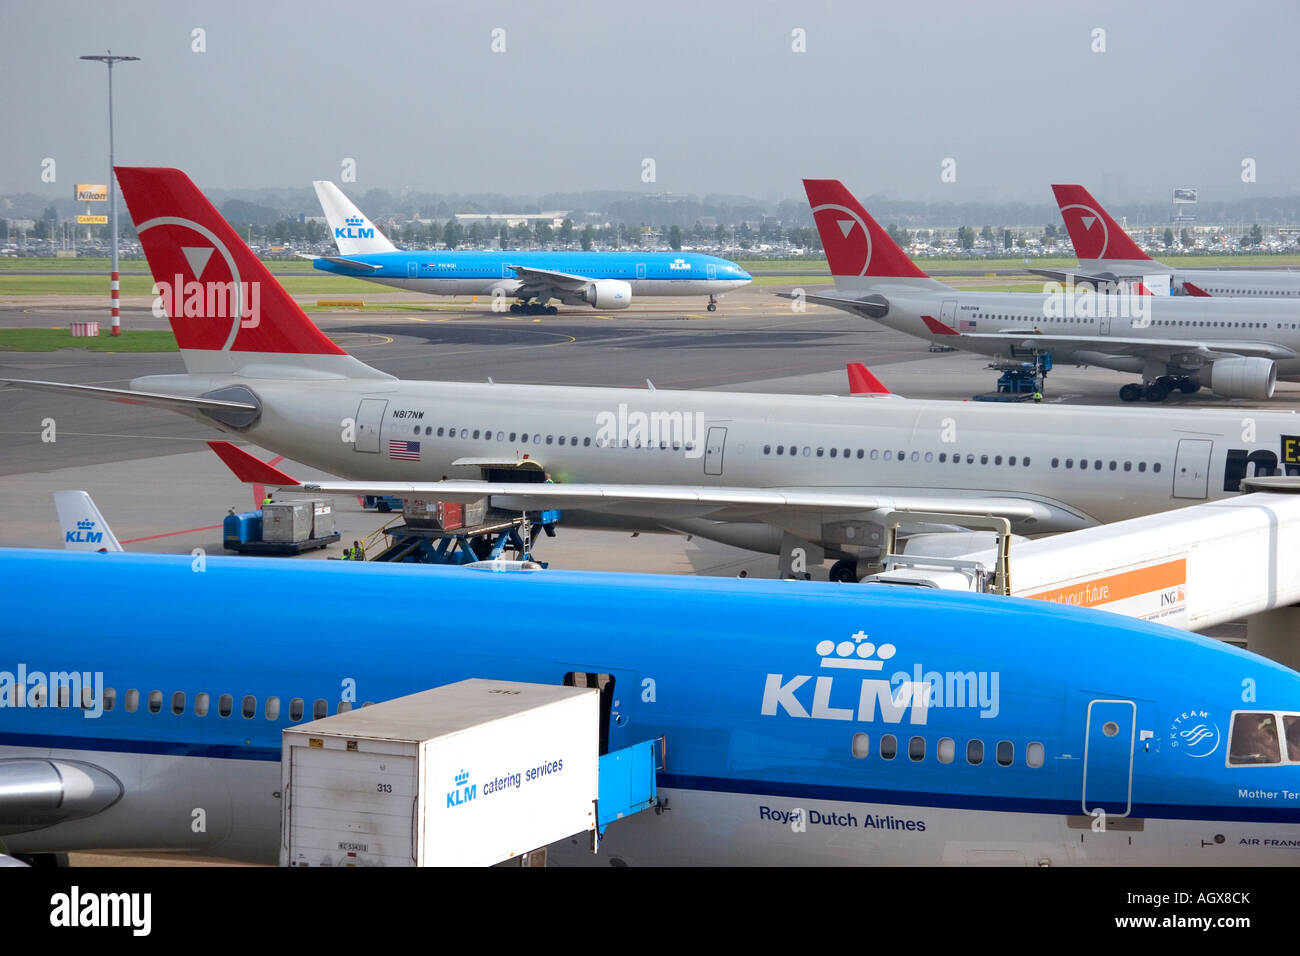 Airplanes at Schiphol Airport in Amsterdam Netherlands Stock Photo